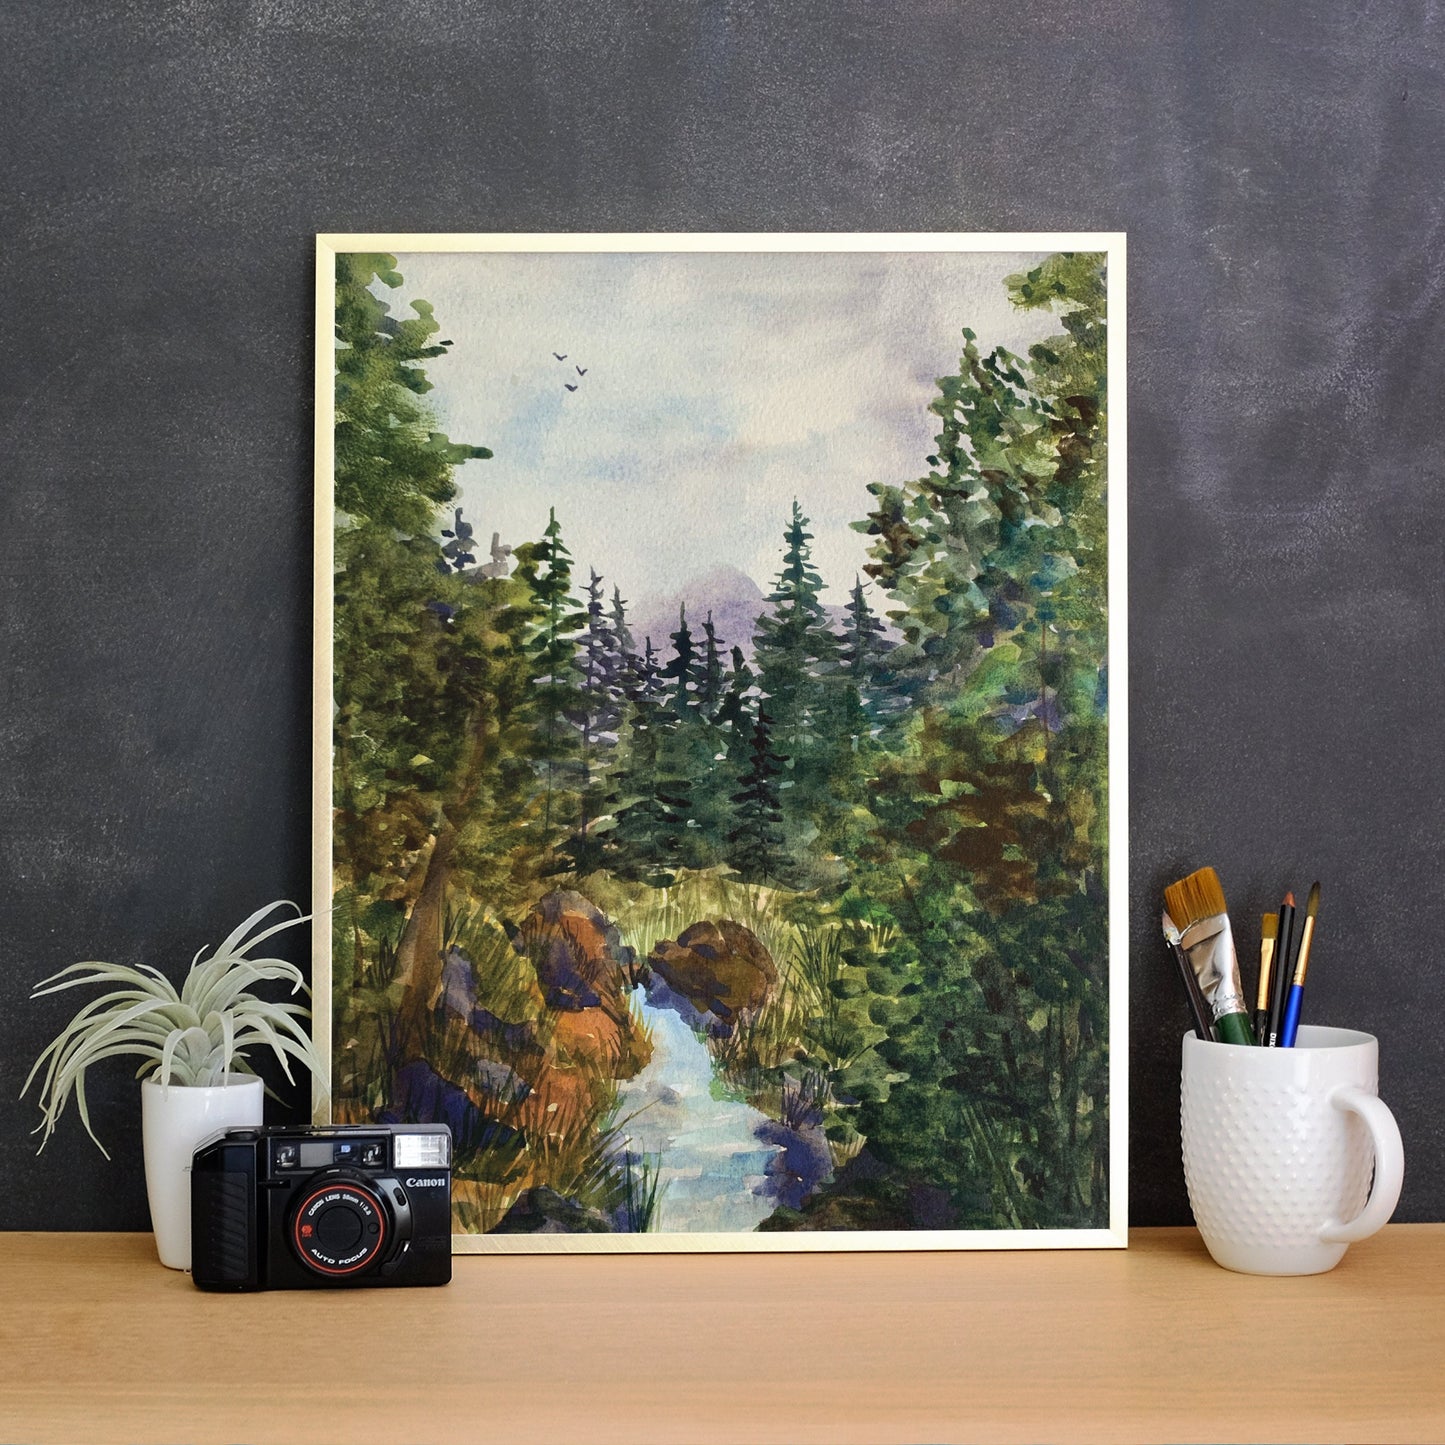 Forest Landscape with Distant Mountains - Watercolor Reproduction, Fine Art Print, Giclee Print, Original Watercolor Artwork